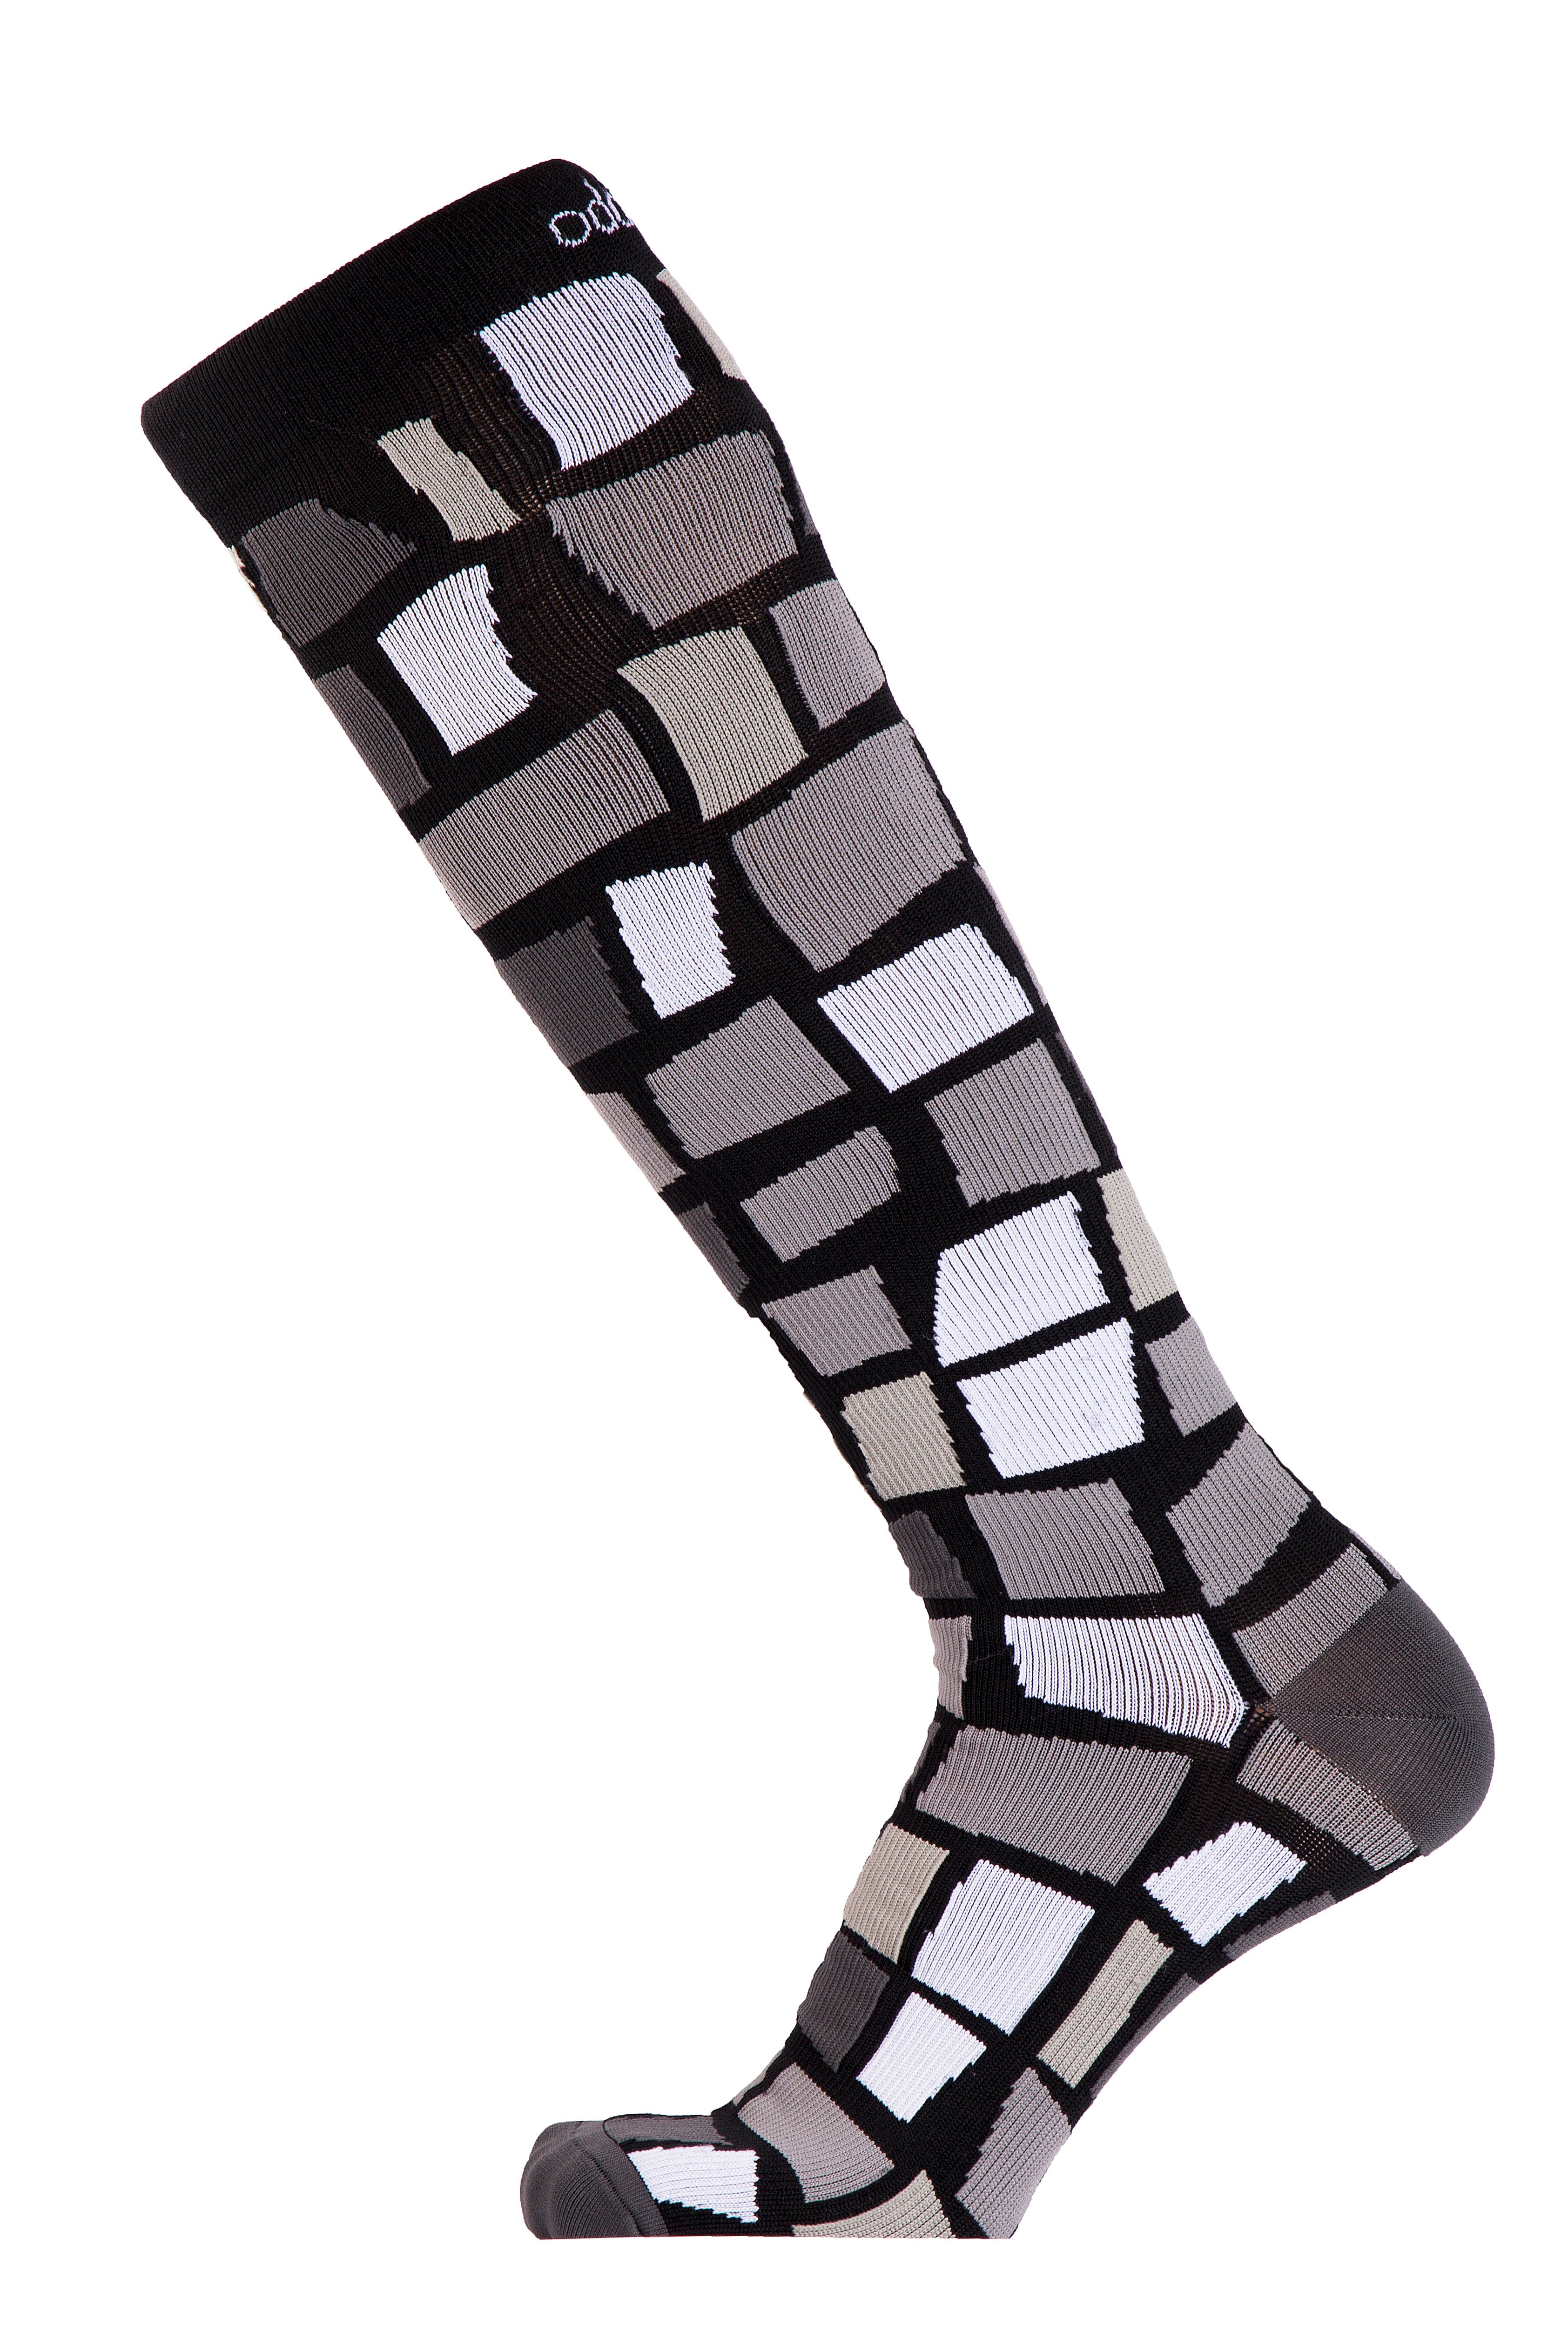 black, white and grey pattern compression socks available in Canada. Side view.